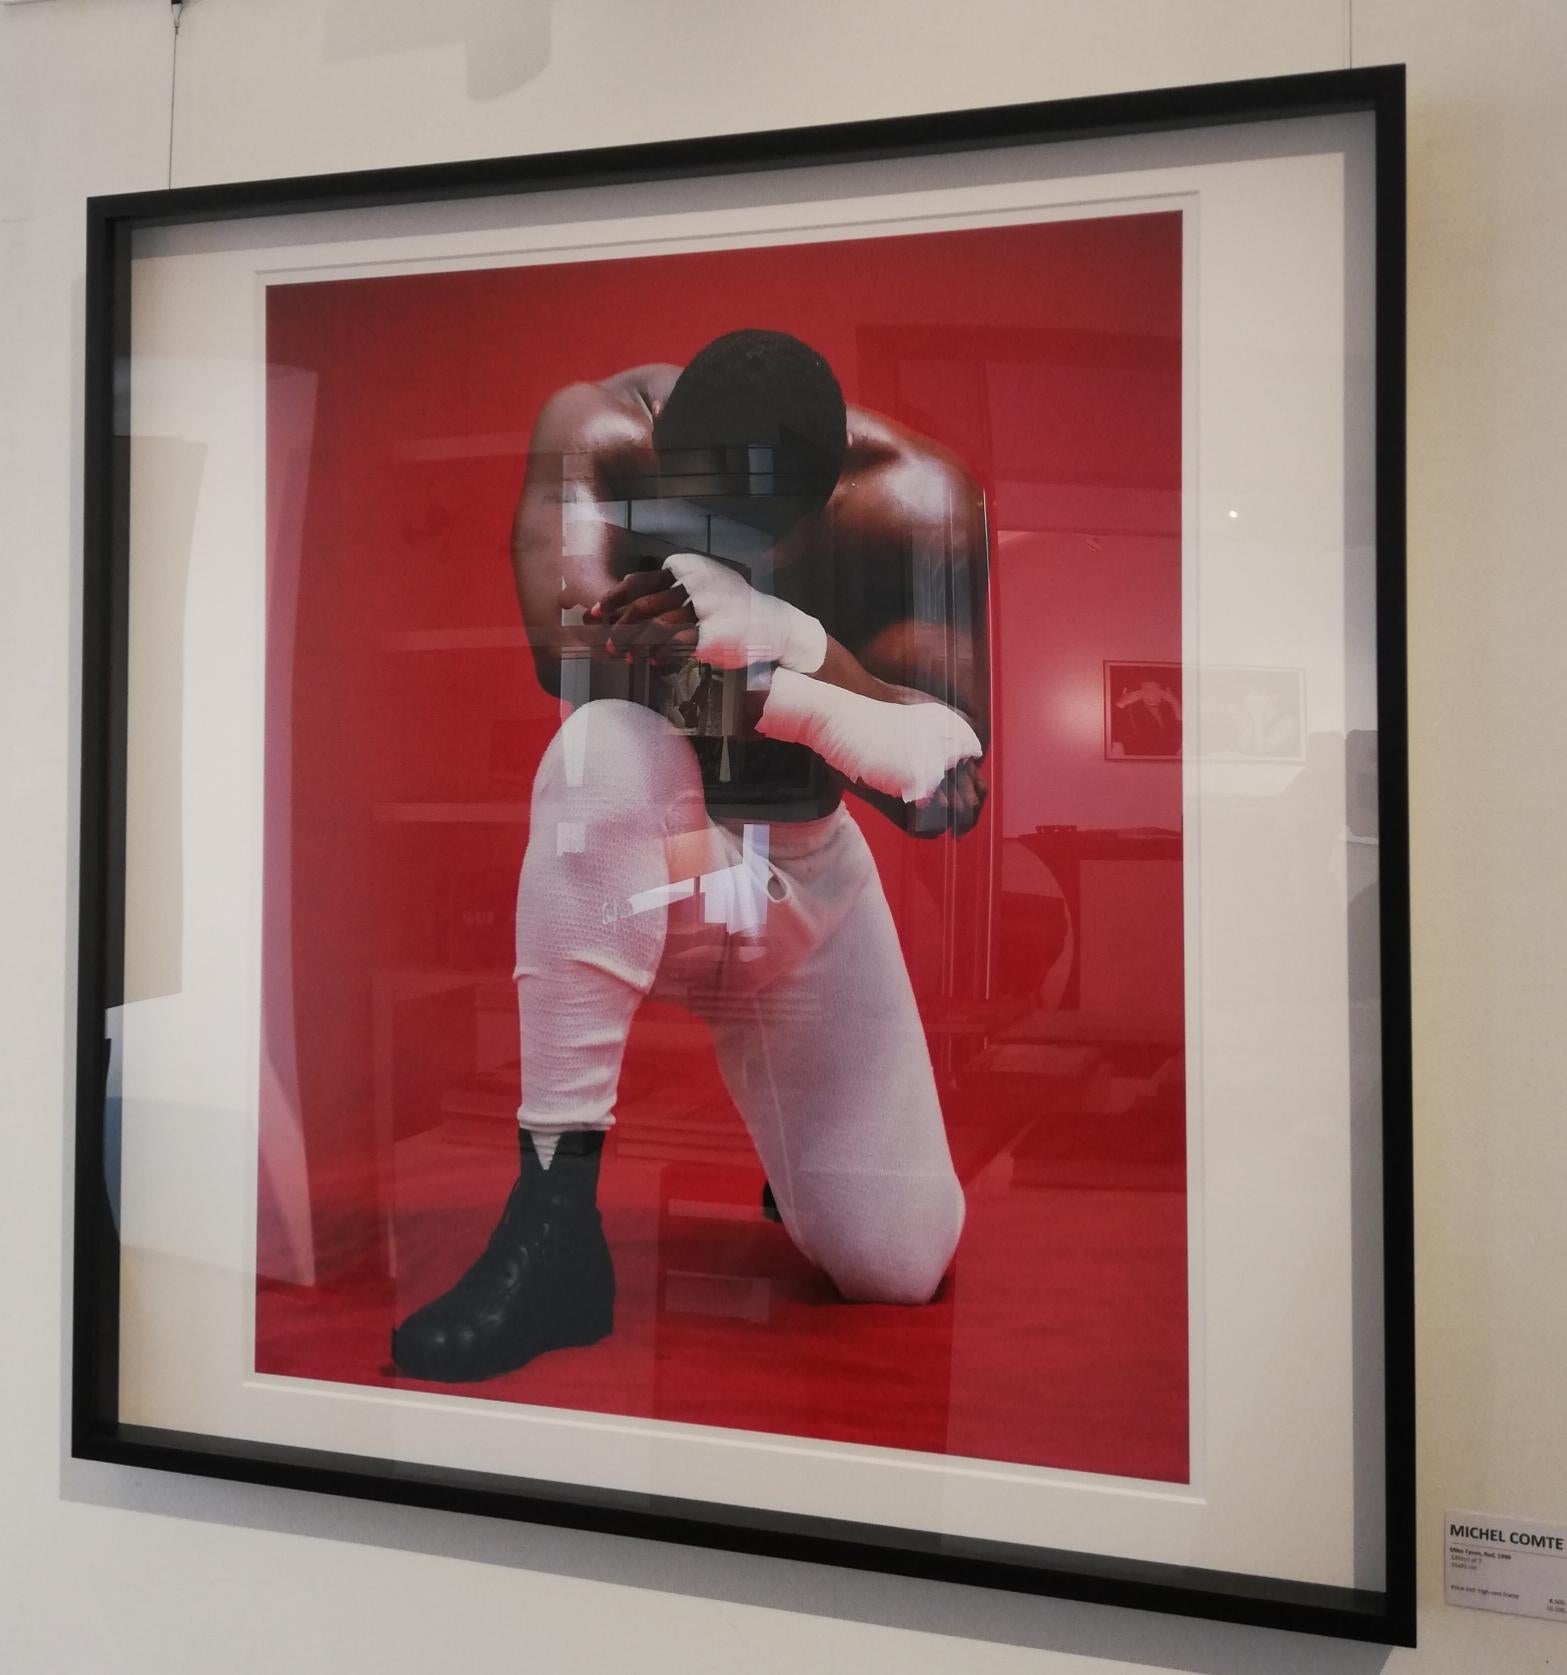 Mike Tyson - Portrait of the boxing legend on his knees - Photograph by Michel Comte